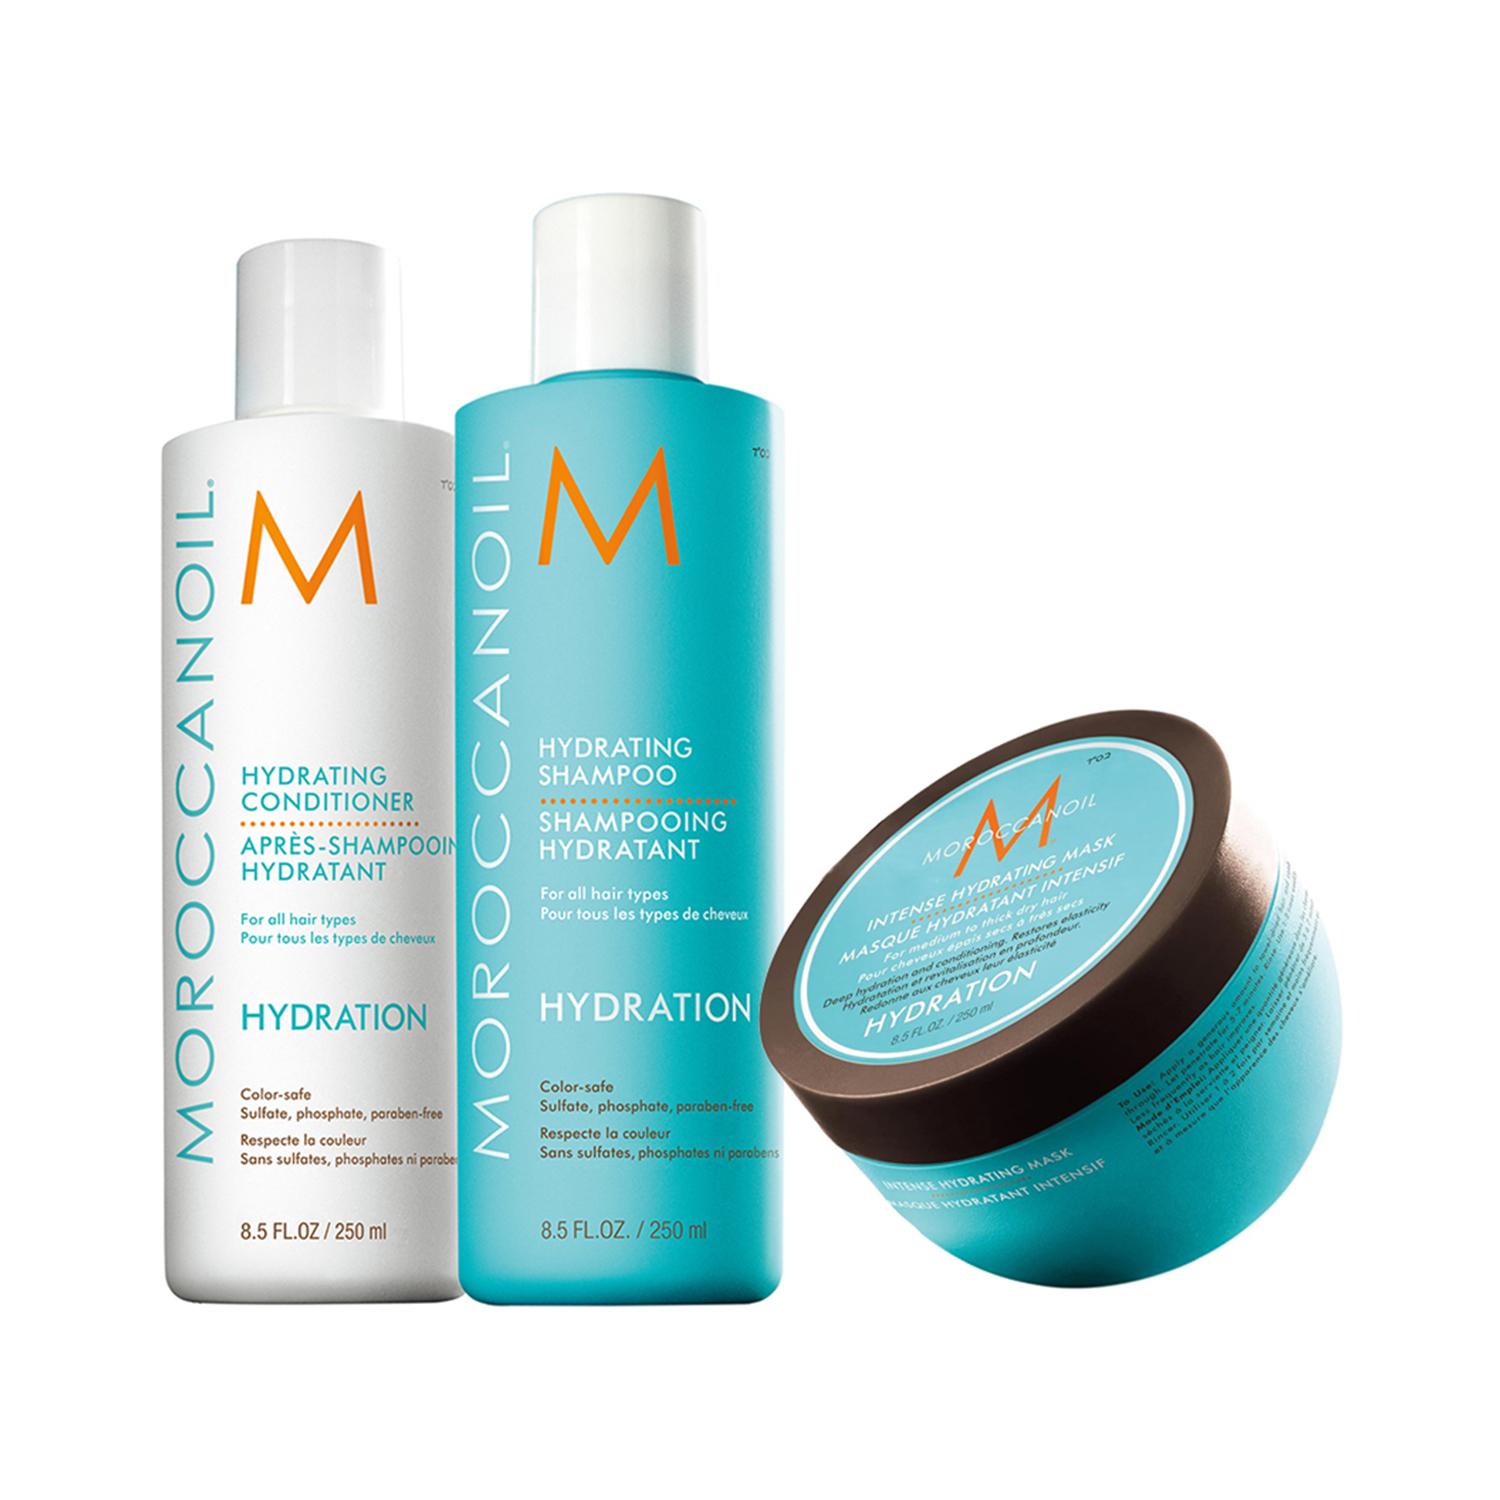 Moroccanoil | Moroccanoil Hydrating Shampoo, Conditioner & Intense Hydrating Mask - Hydrating Combo